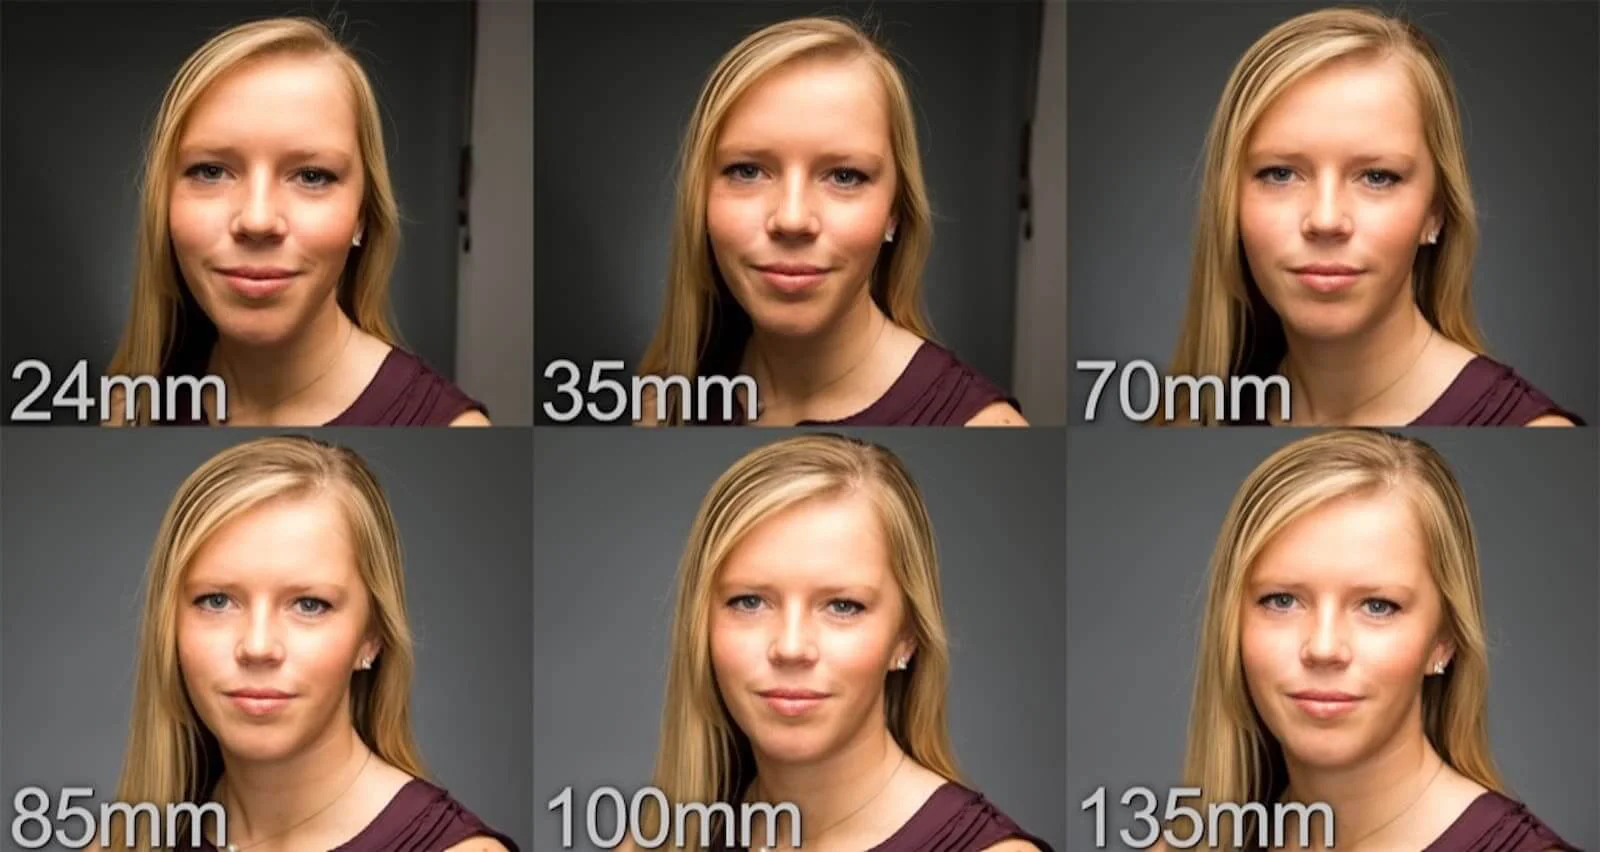  A comparison of the field of view of wide-angle (24mm), standard (35mm and 50mm), and telephoto (85mm, 100mm, and 135mm) lenses for vlogging, showing how the focal length affects the perspective and framing of the subject.